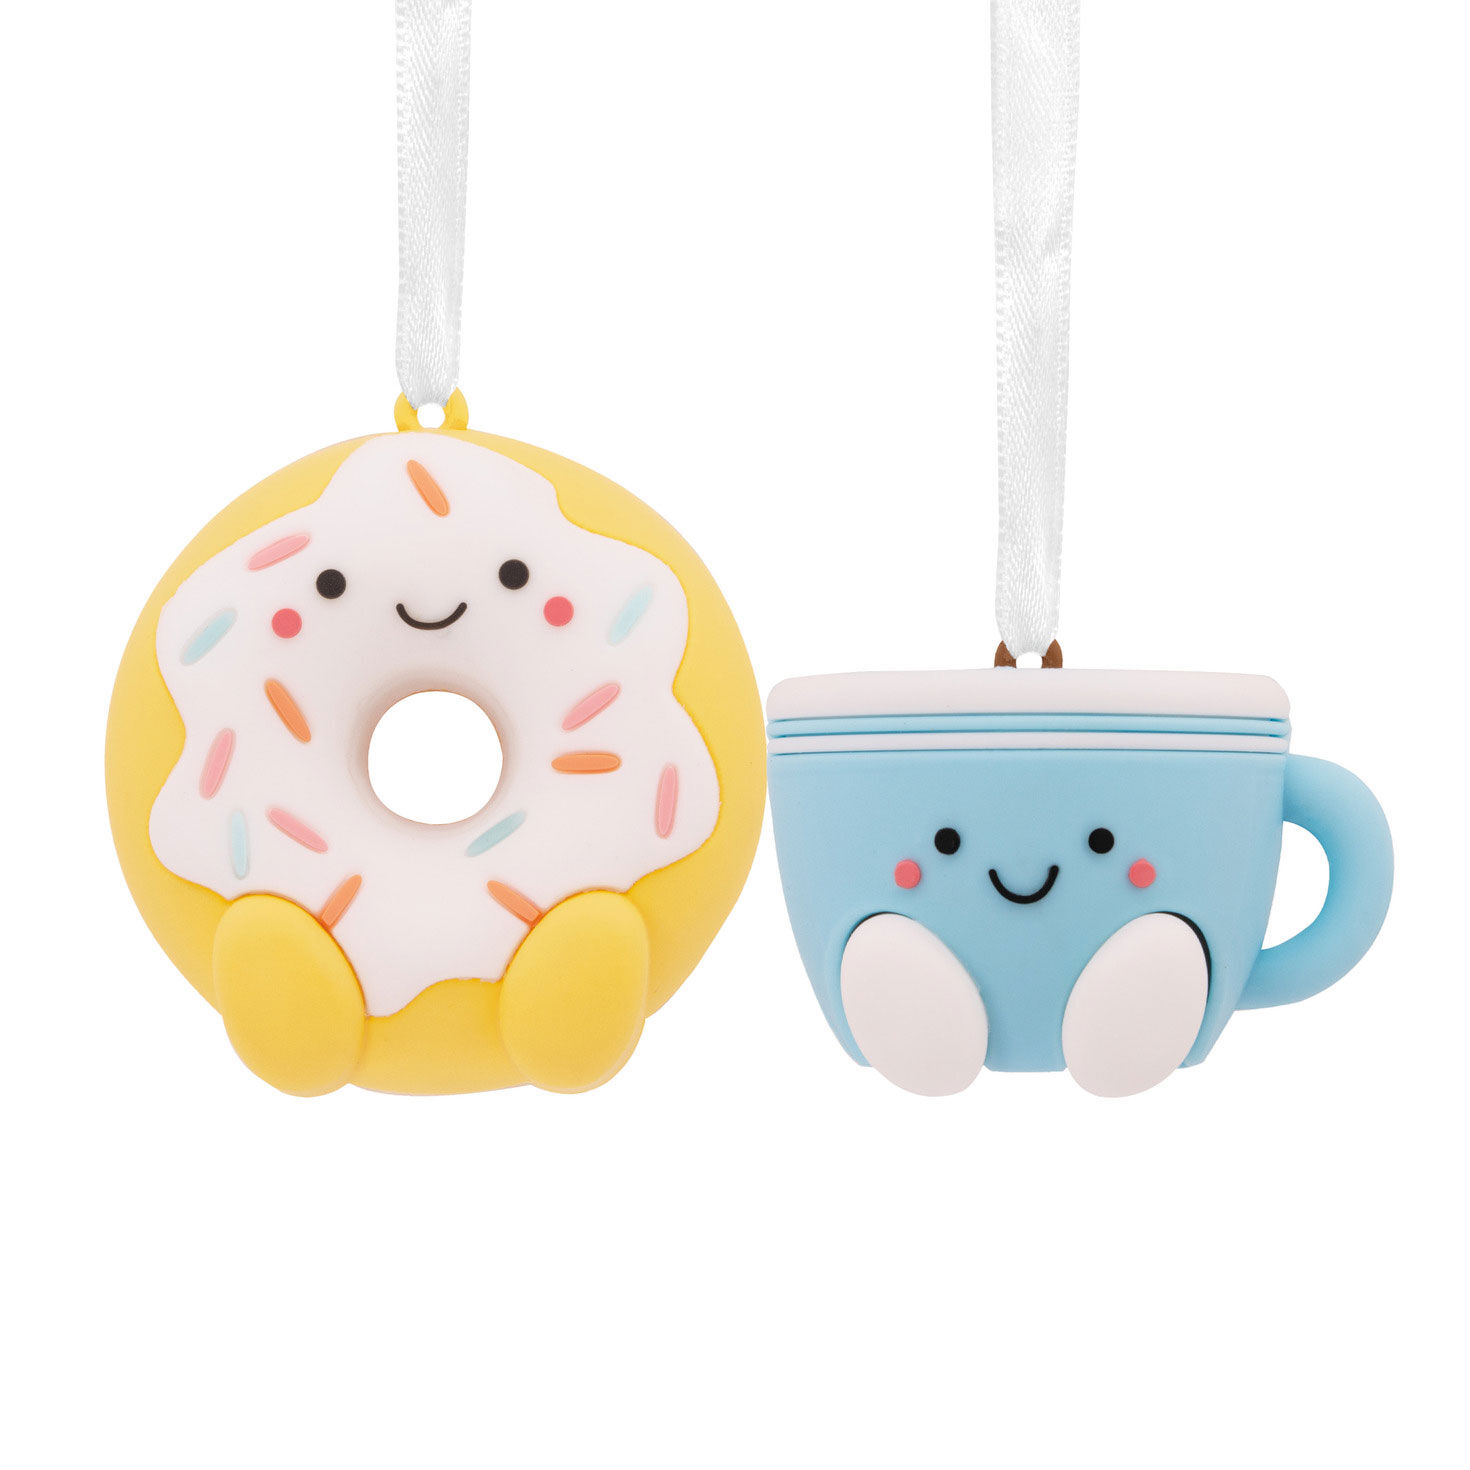 Better Together Donut and Coffee Magnetic Hallmark Ornaments, Set of 2 for only USD 9.99 | Hallmark